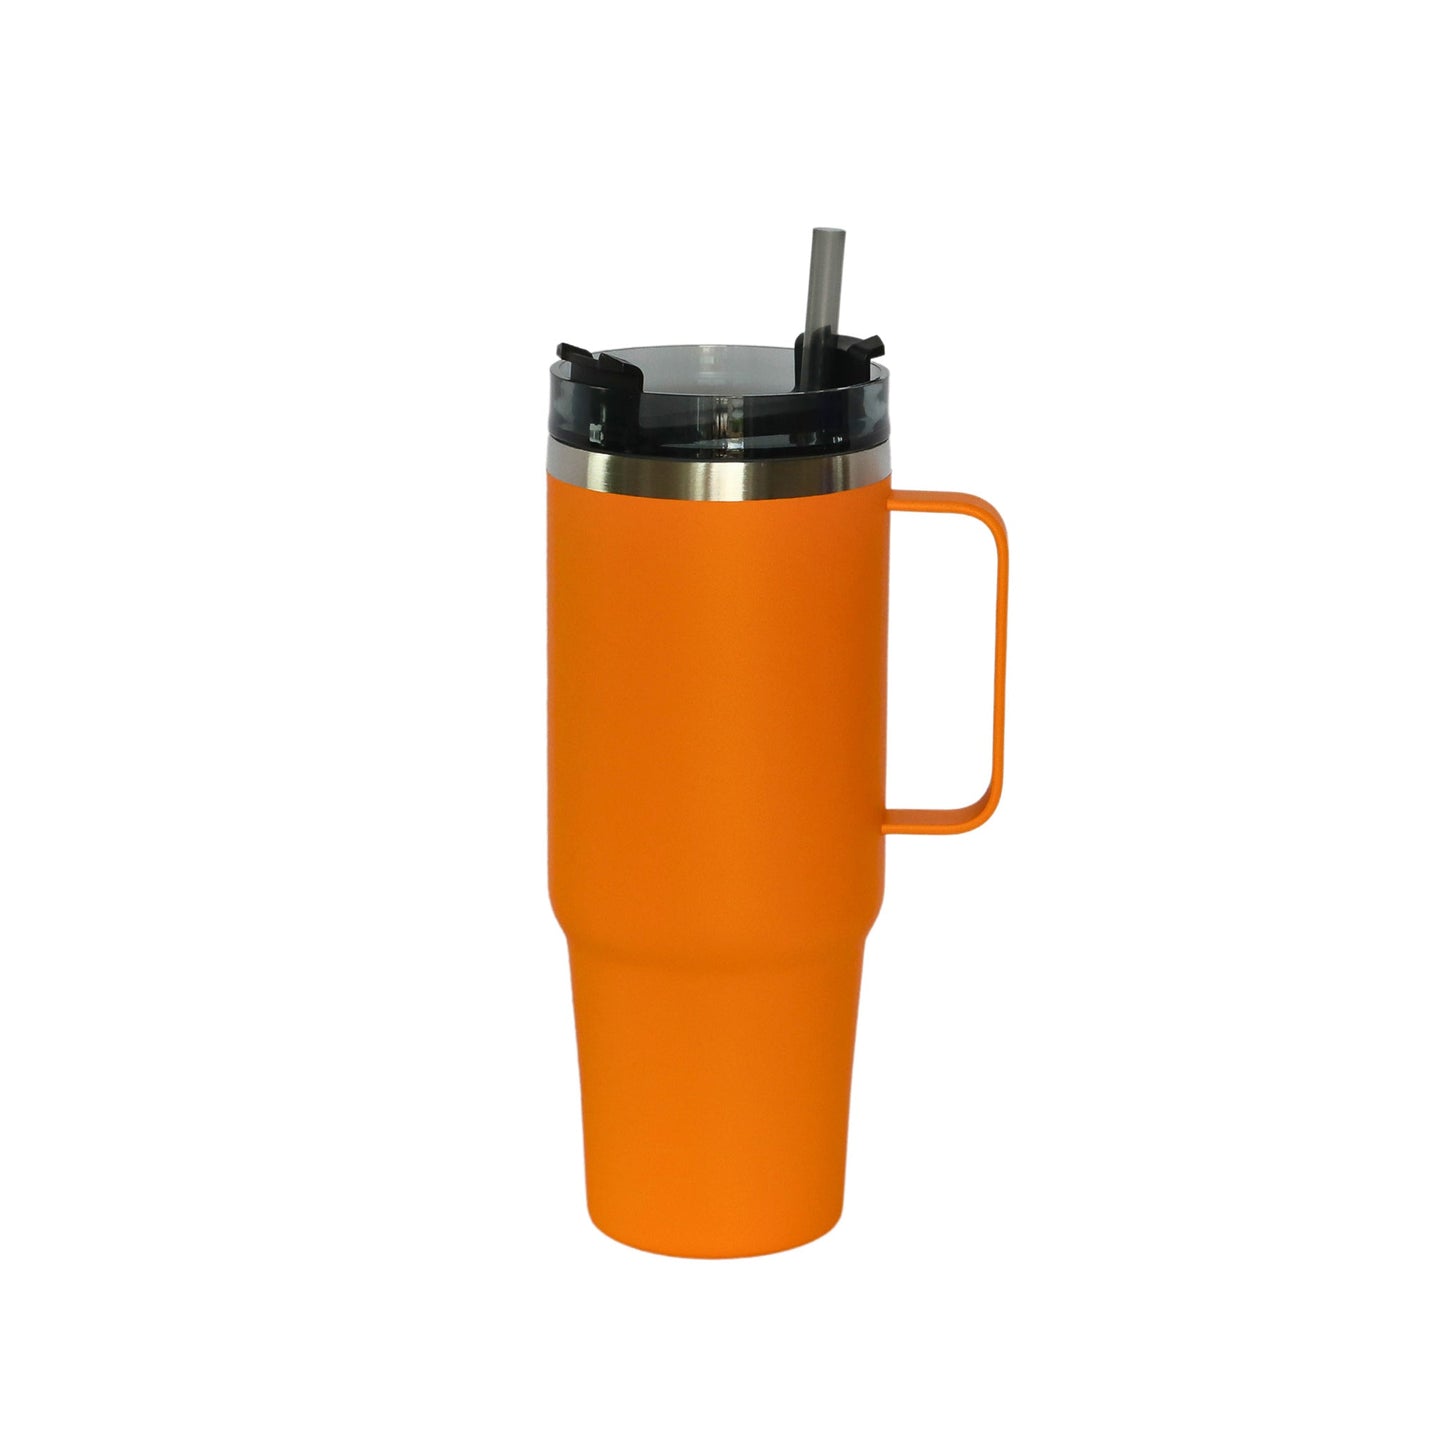 30 Oz Stainless Steel Tumbler with Handle & Straw -  Orange by Creative Gifts